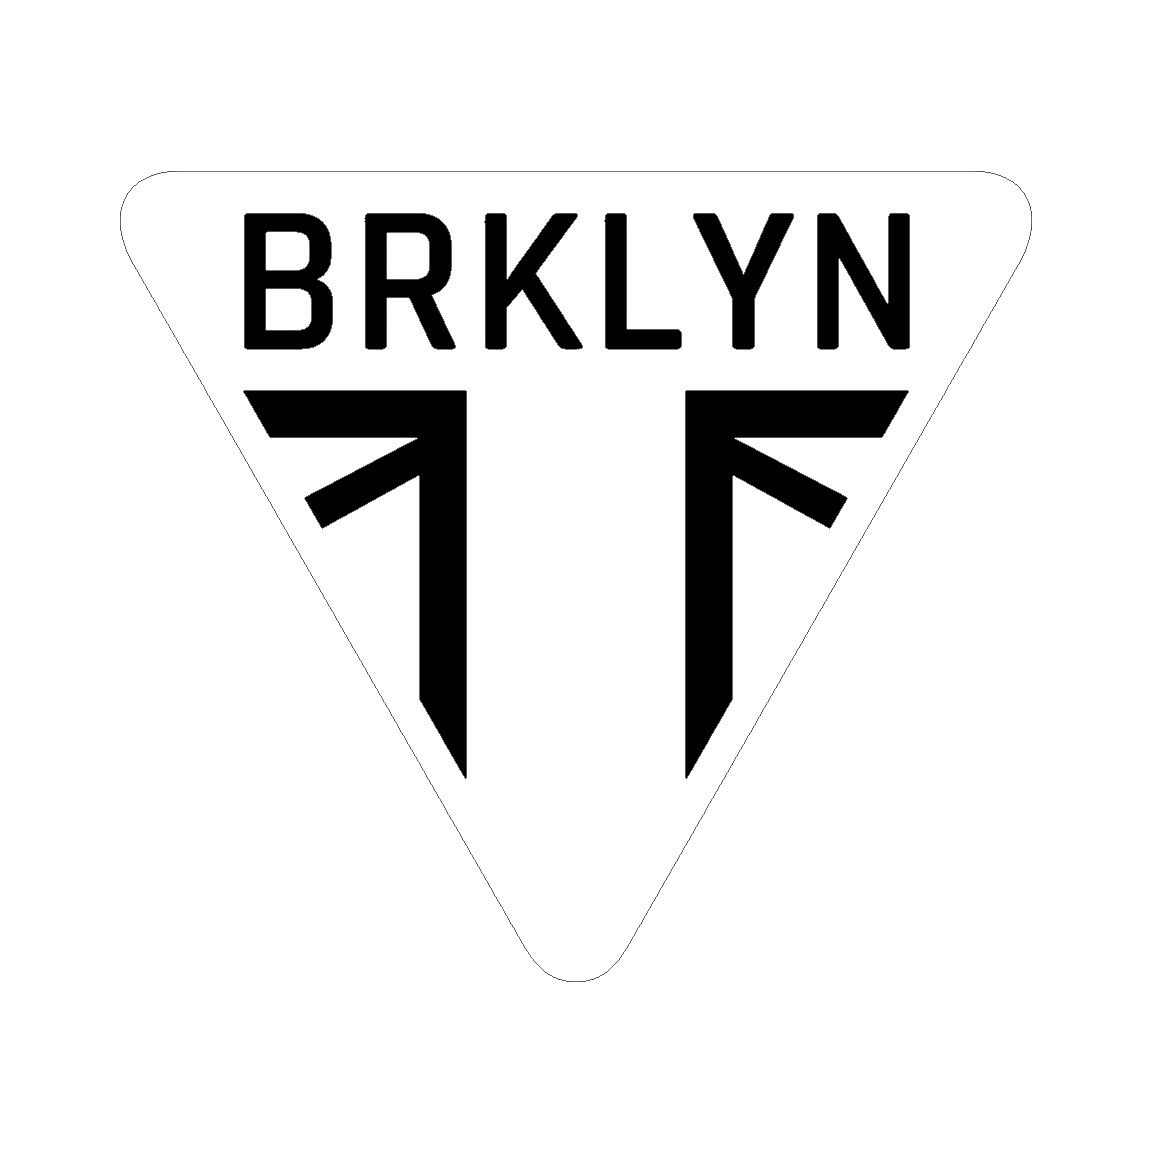 Triumph of Brooklyn proudly serves Brooklyn, NY and our neighbors in Queens, Manhattan, Staten Island, Jersey City, and Hempstead